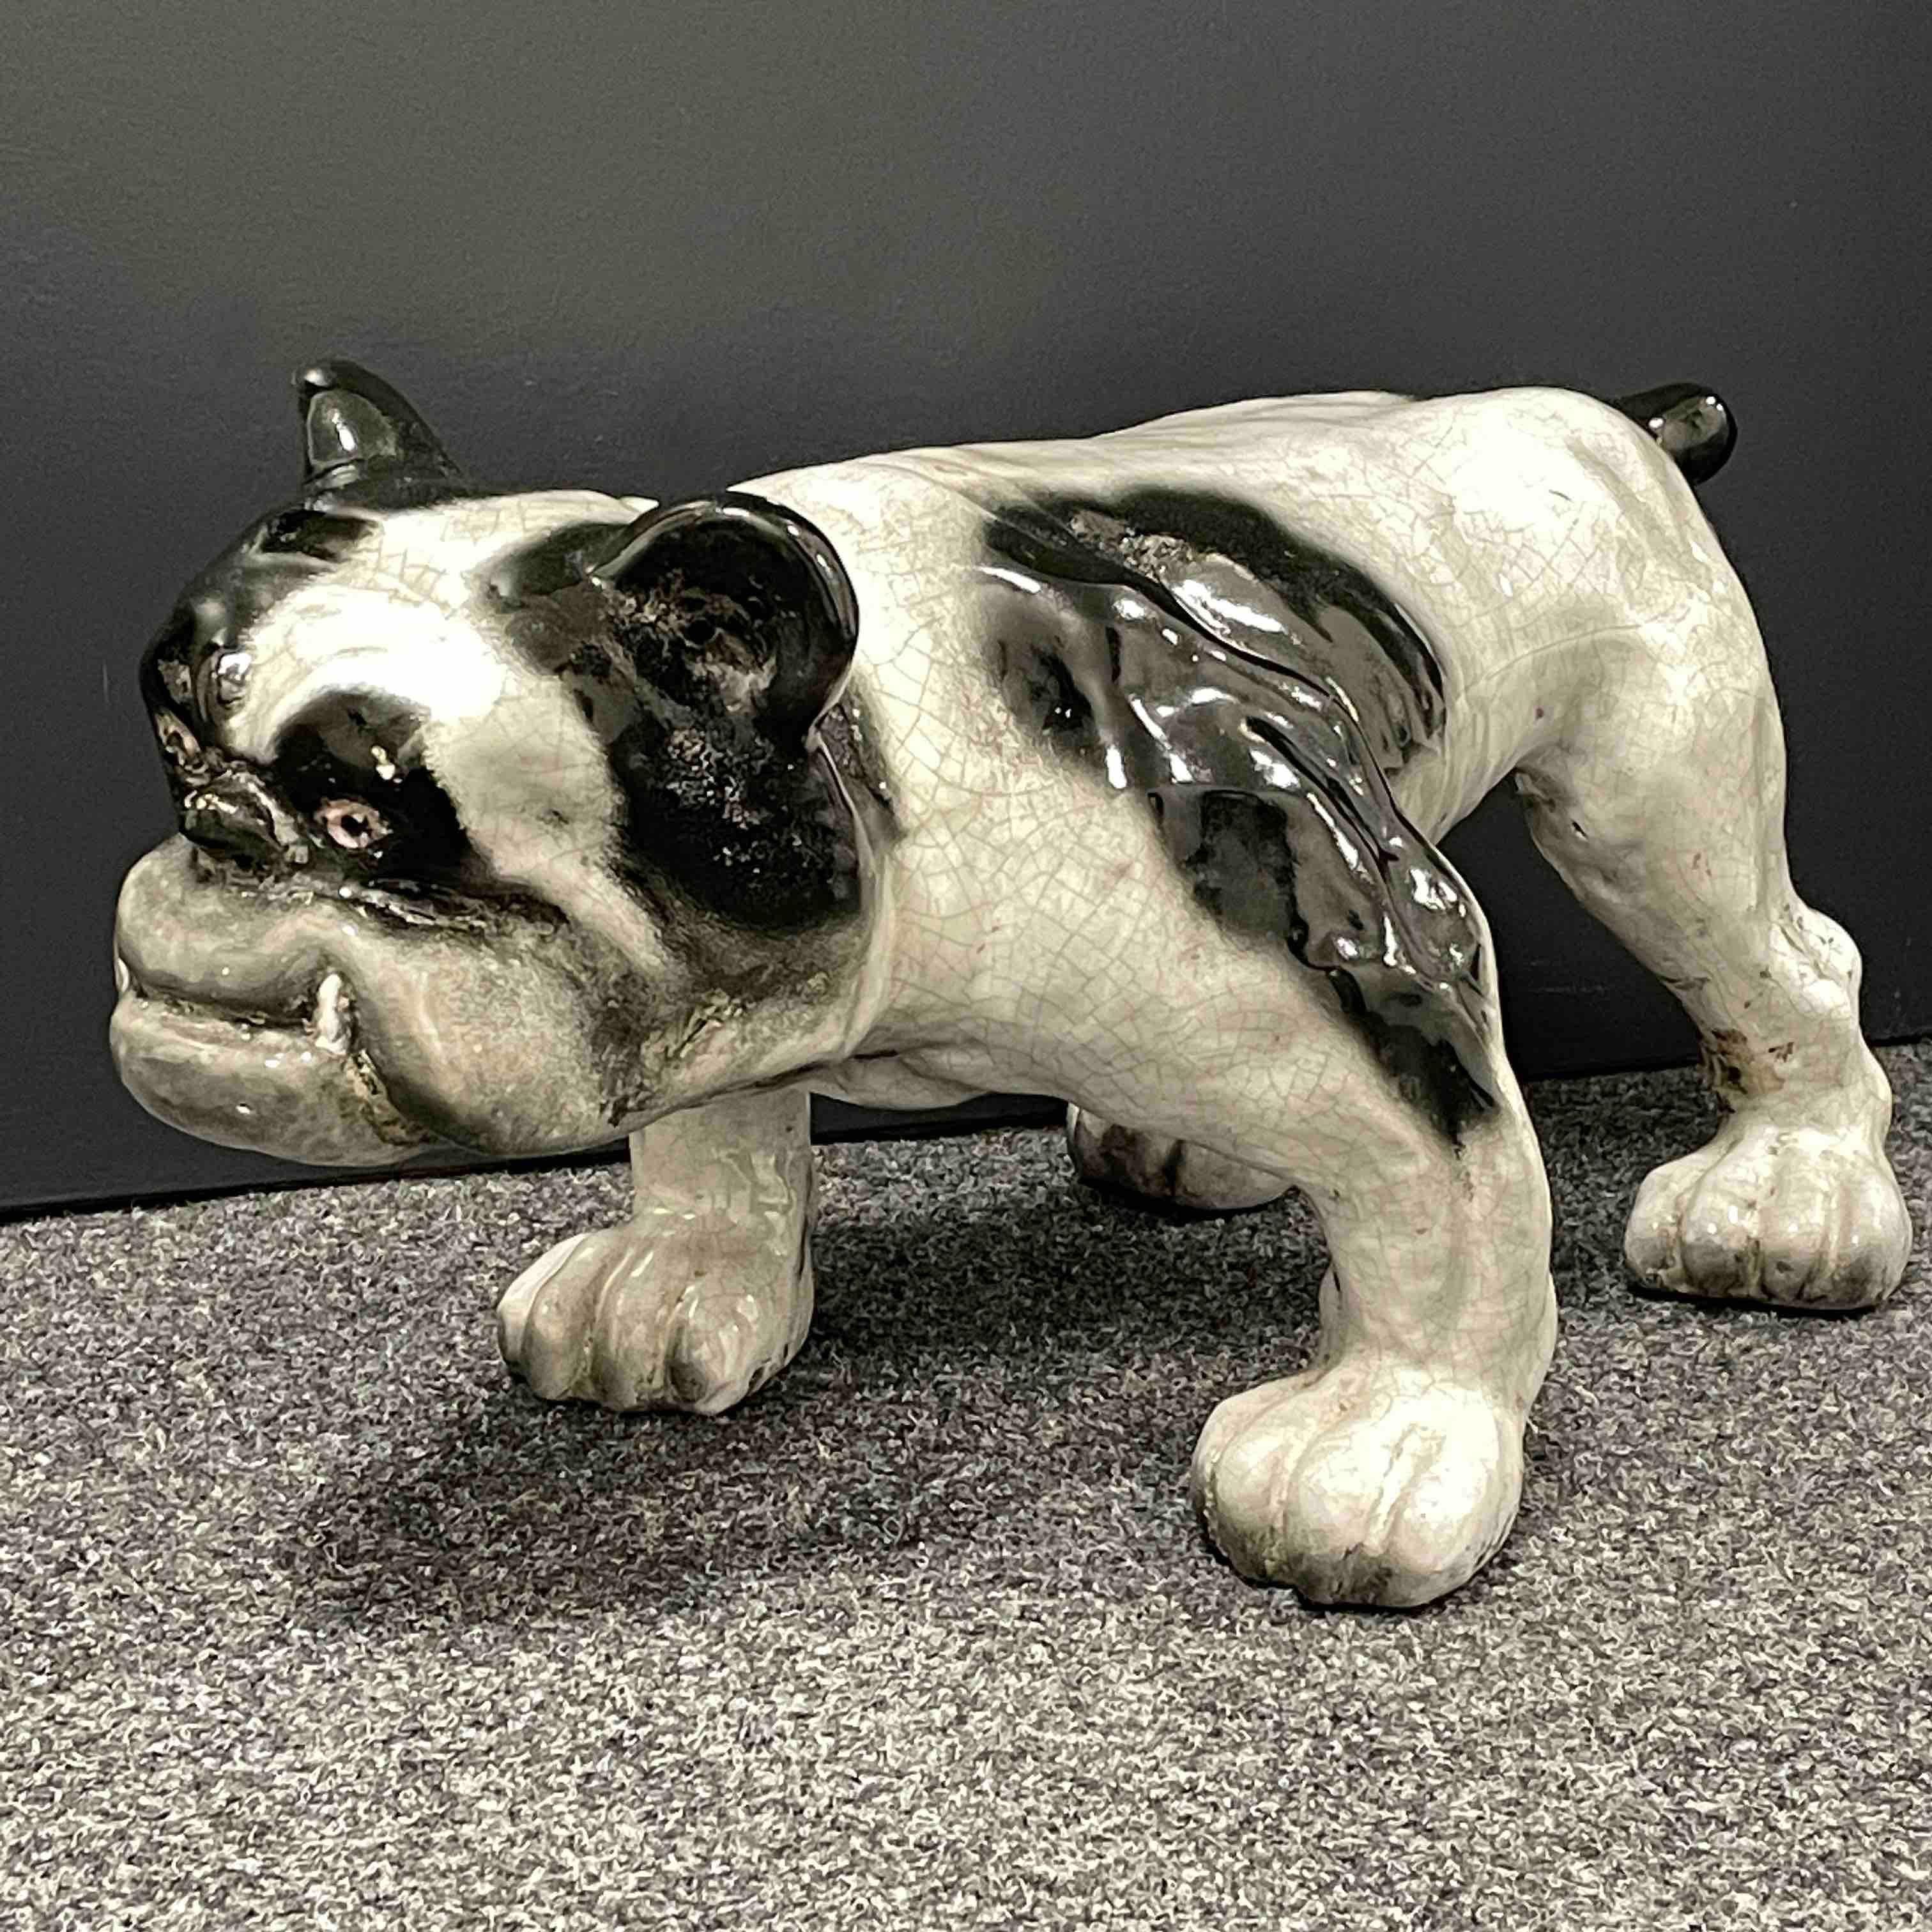 Classic early 1960s Italian Majolica dog statue figurine. Nice addition to your room or entry hall, pool area or patio. Made of Majolica ceramic, hand painted.